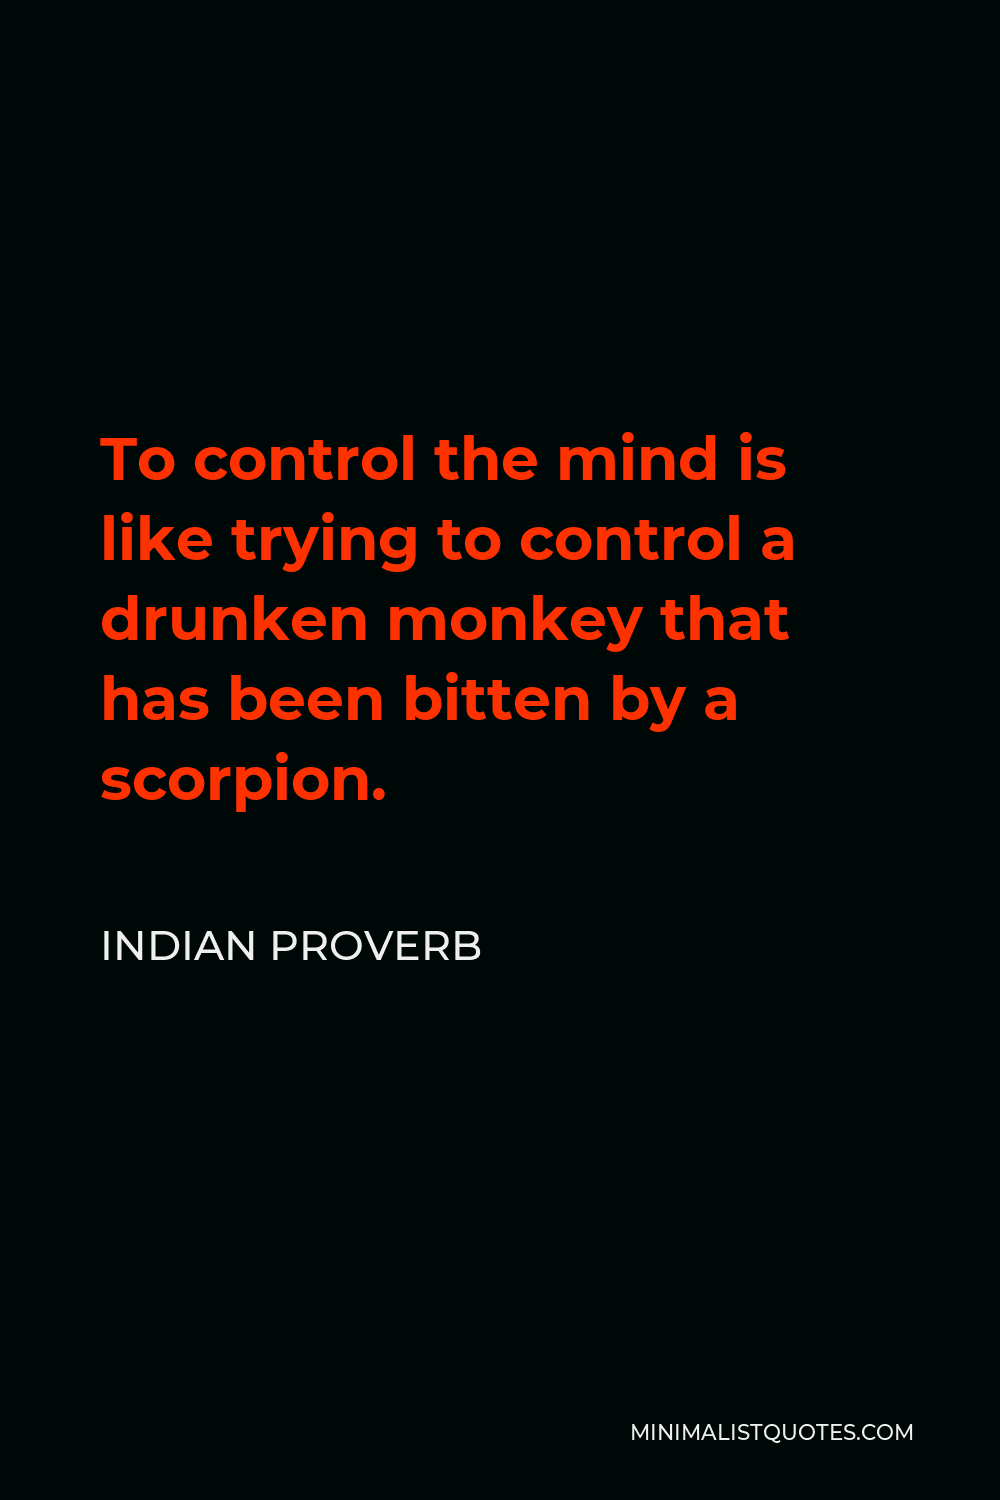 Indian Proverb Quote - To control the mind is like trying to control a drunken monkey that has been bitten by a scorpion.